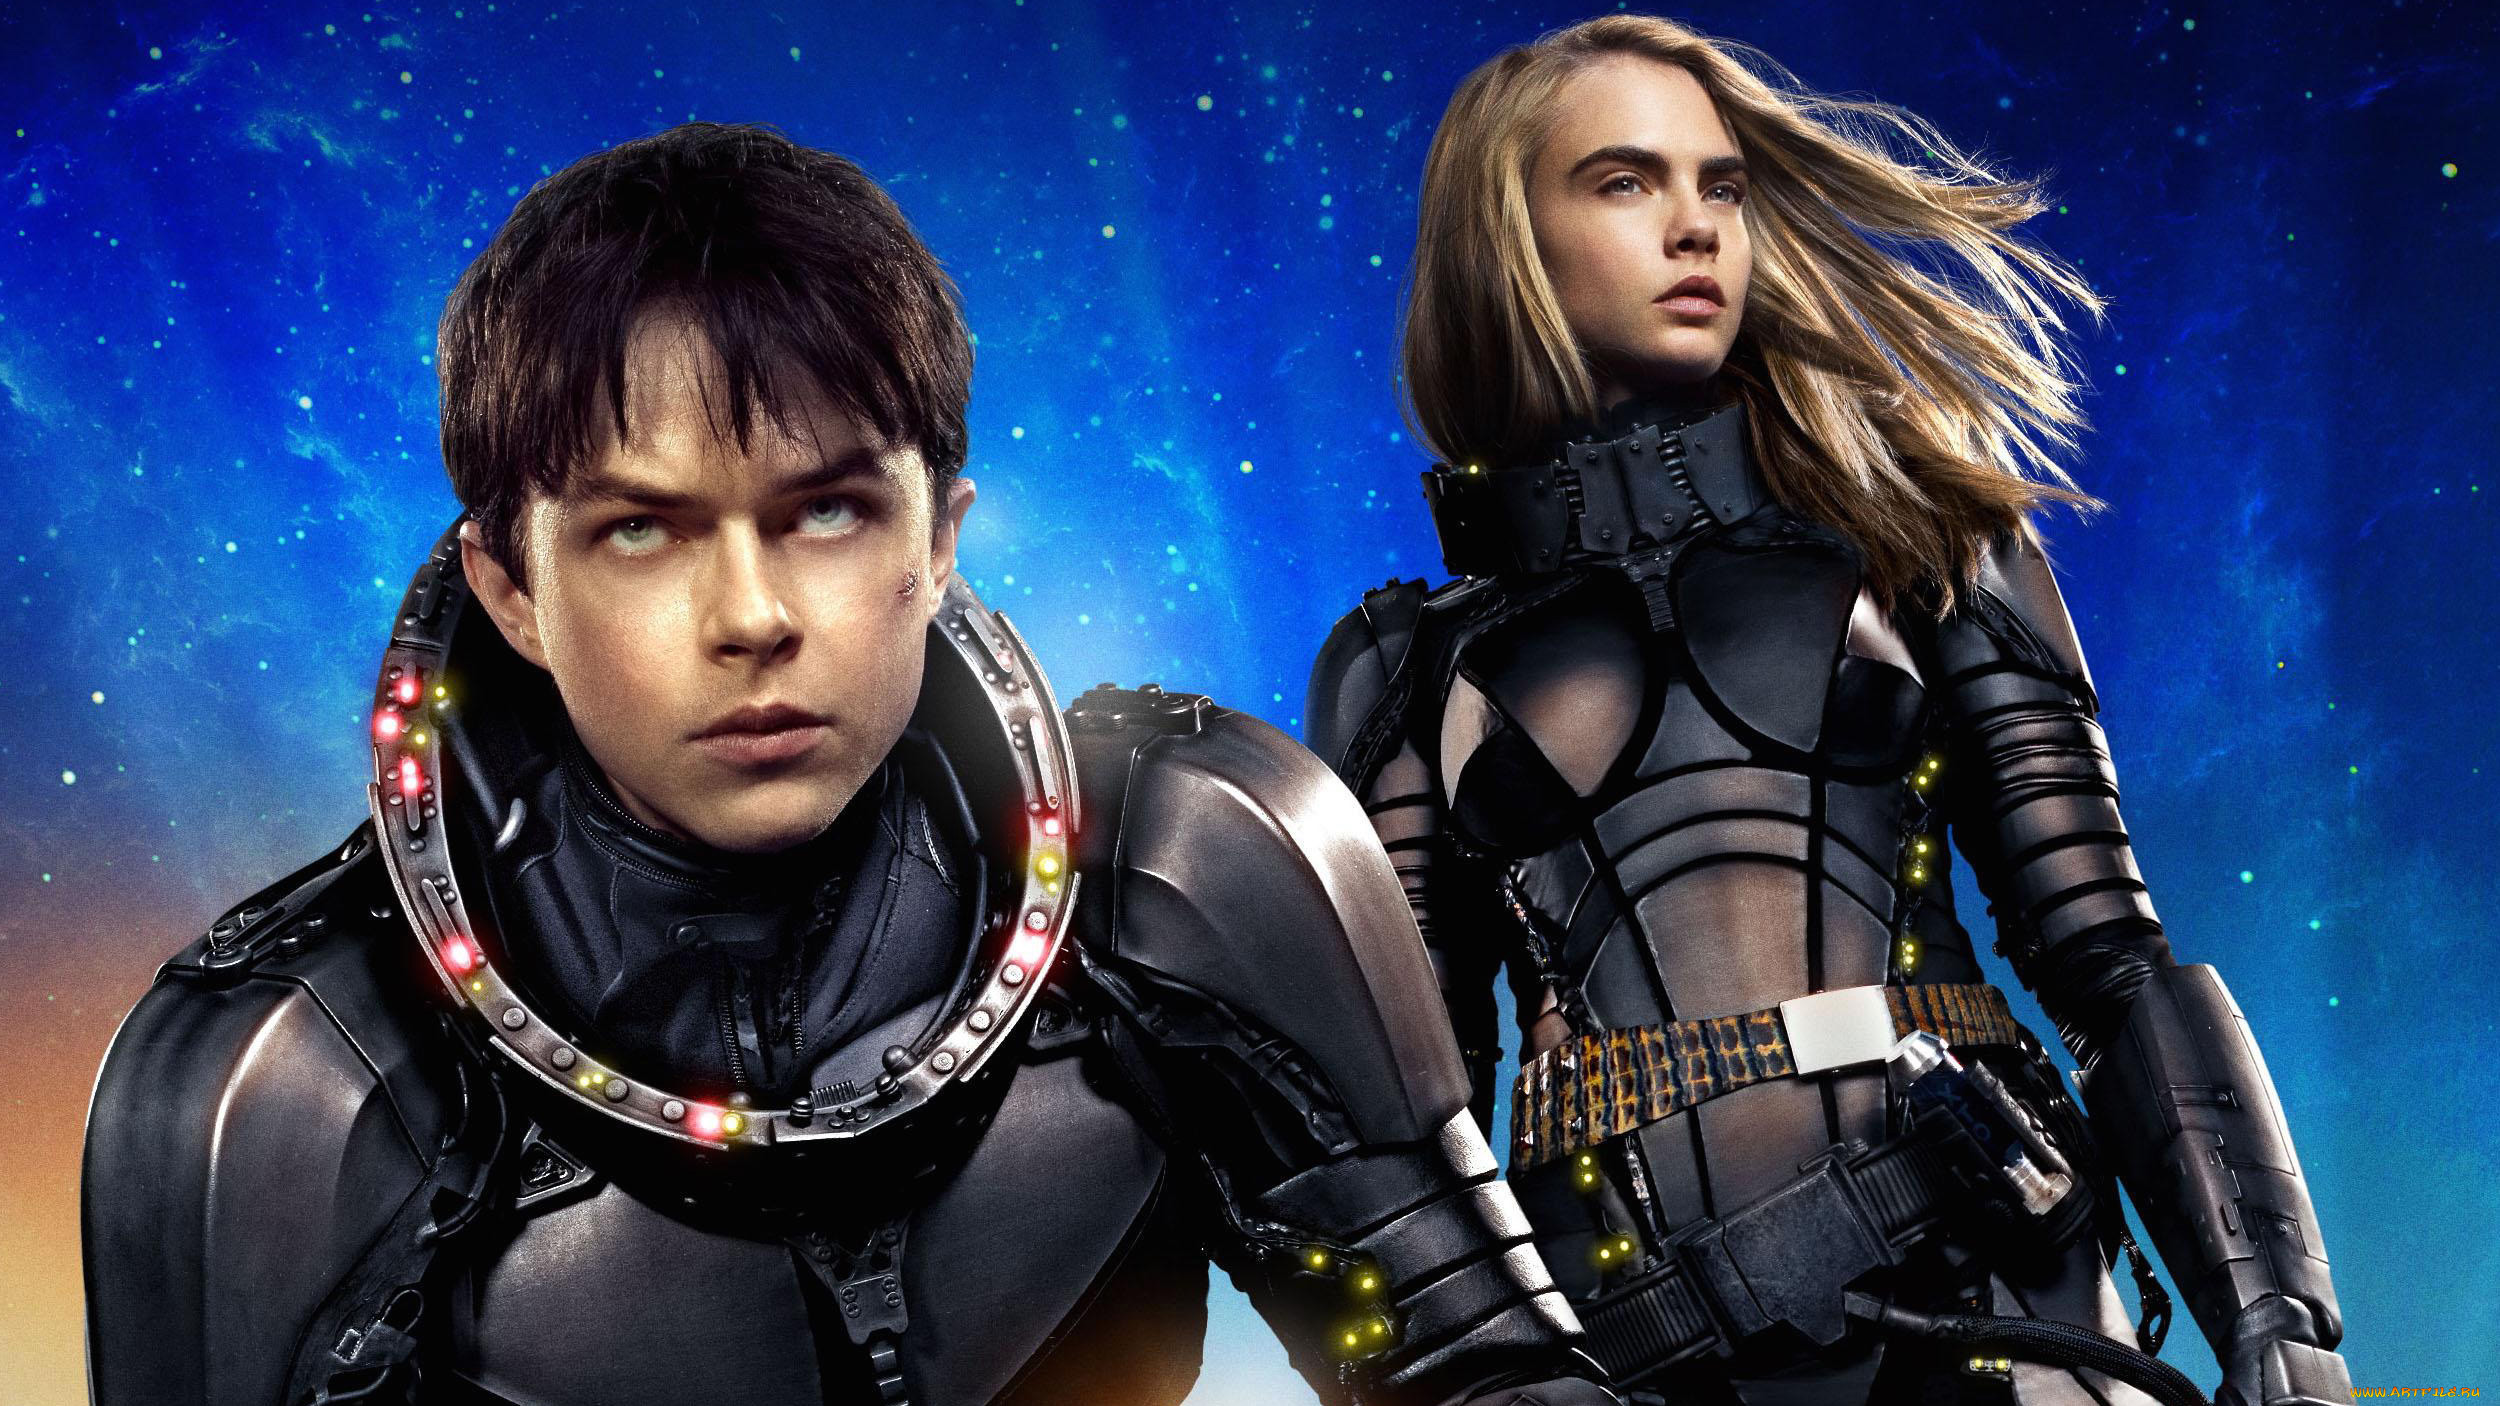  , valerian and the city of a thousand planets, valerian, and, laureline, in, the, city, of, a, thousand, planets